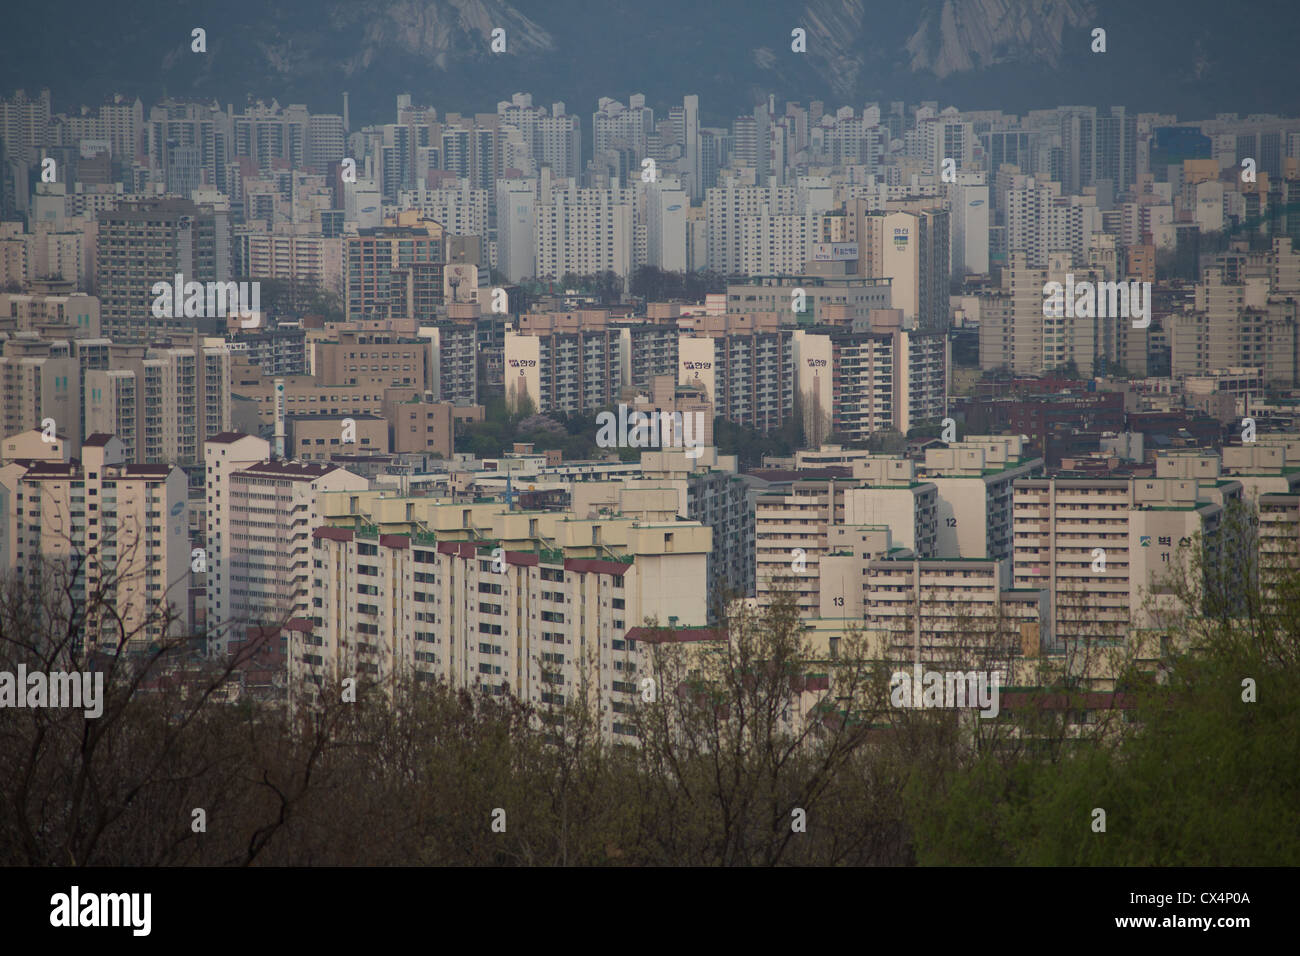 Hundreds of high rise apartment buildings crowded together near the mountains in Seoul, South Korea Stock Photo